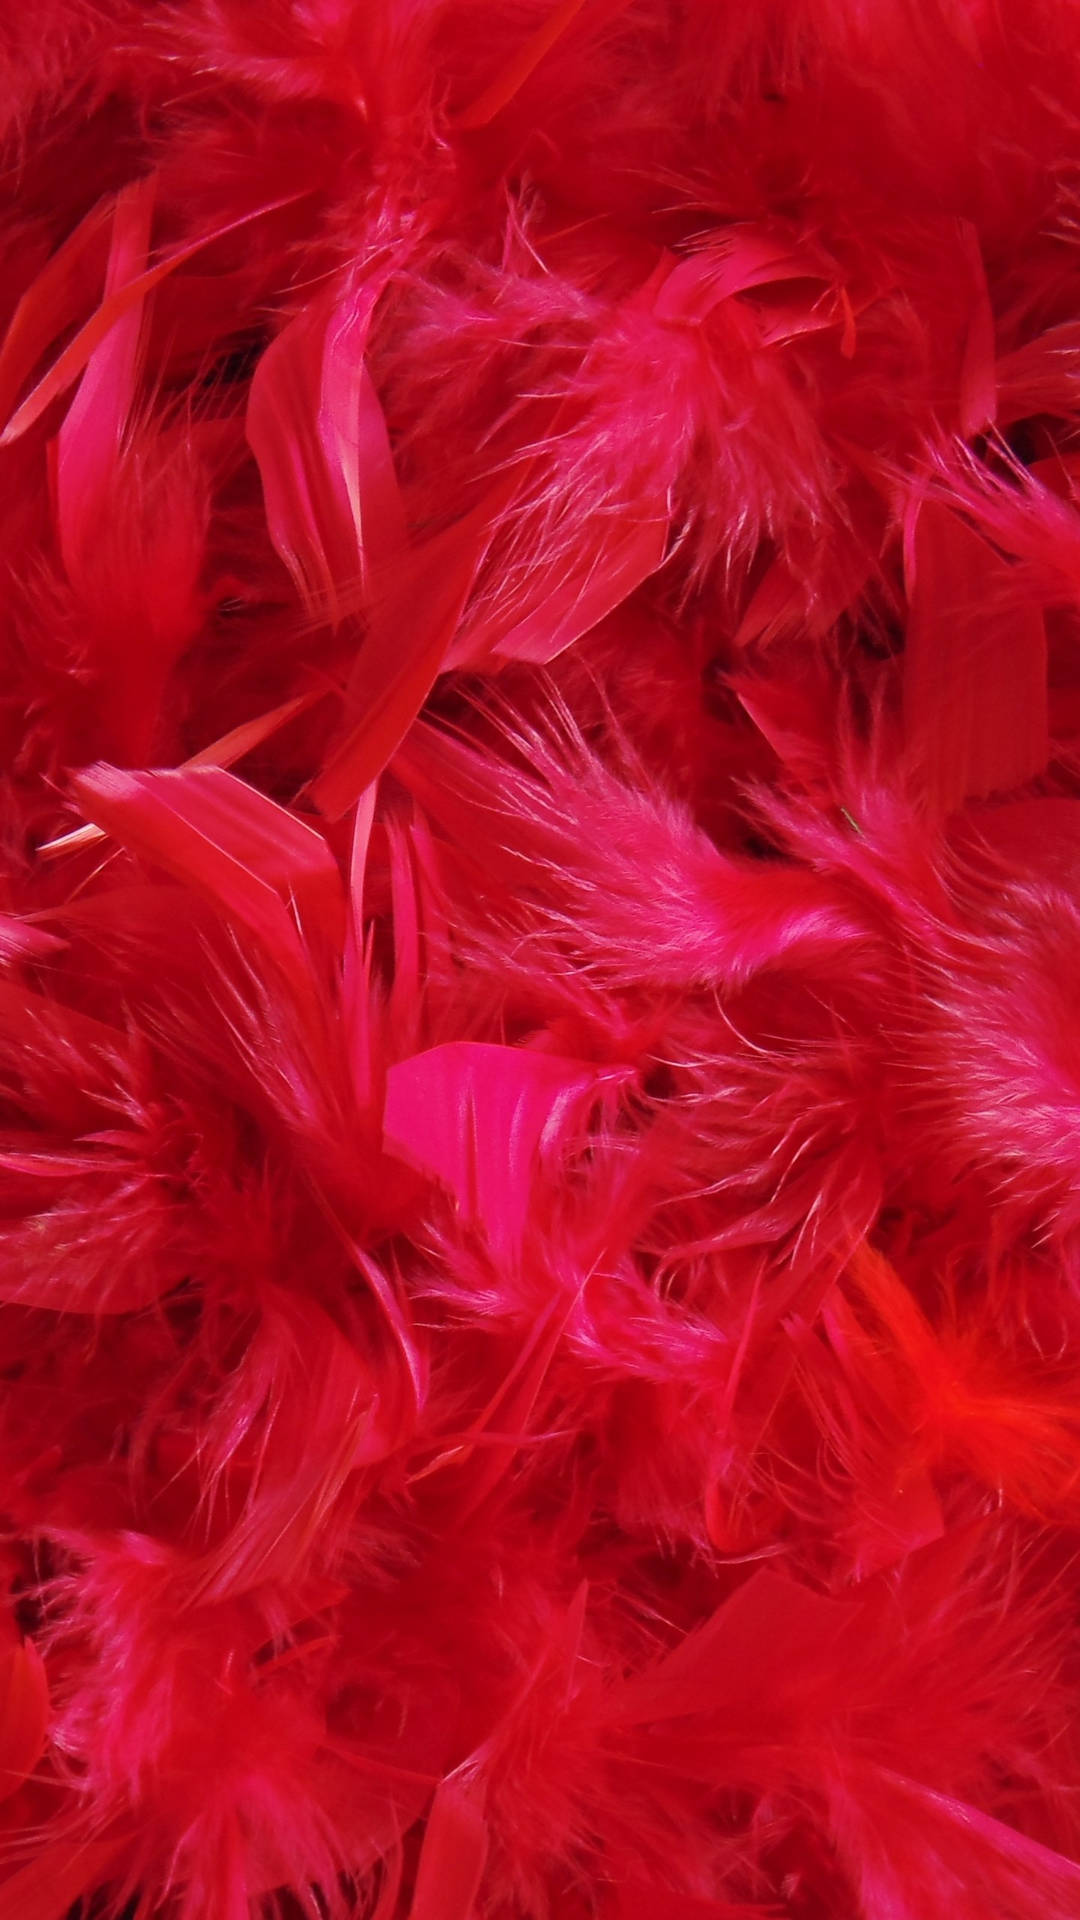 Samsung Galaxy S7 Edge Red Feathers Wallpaper